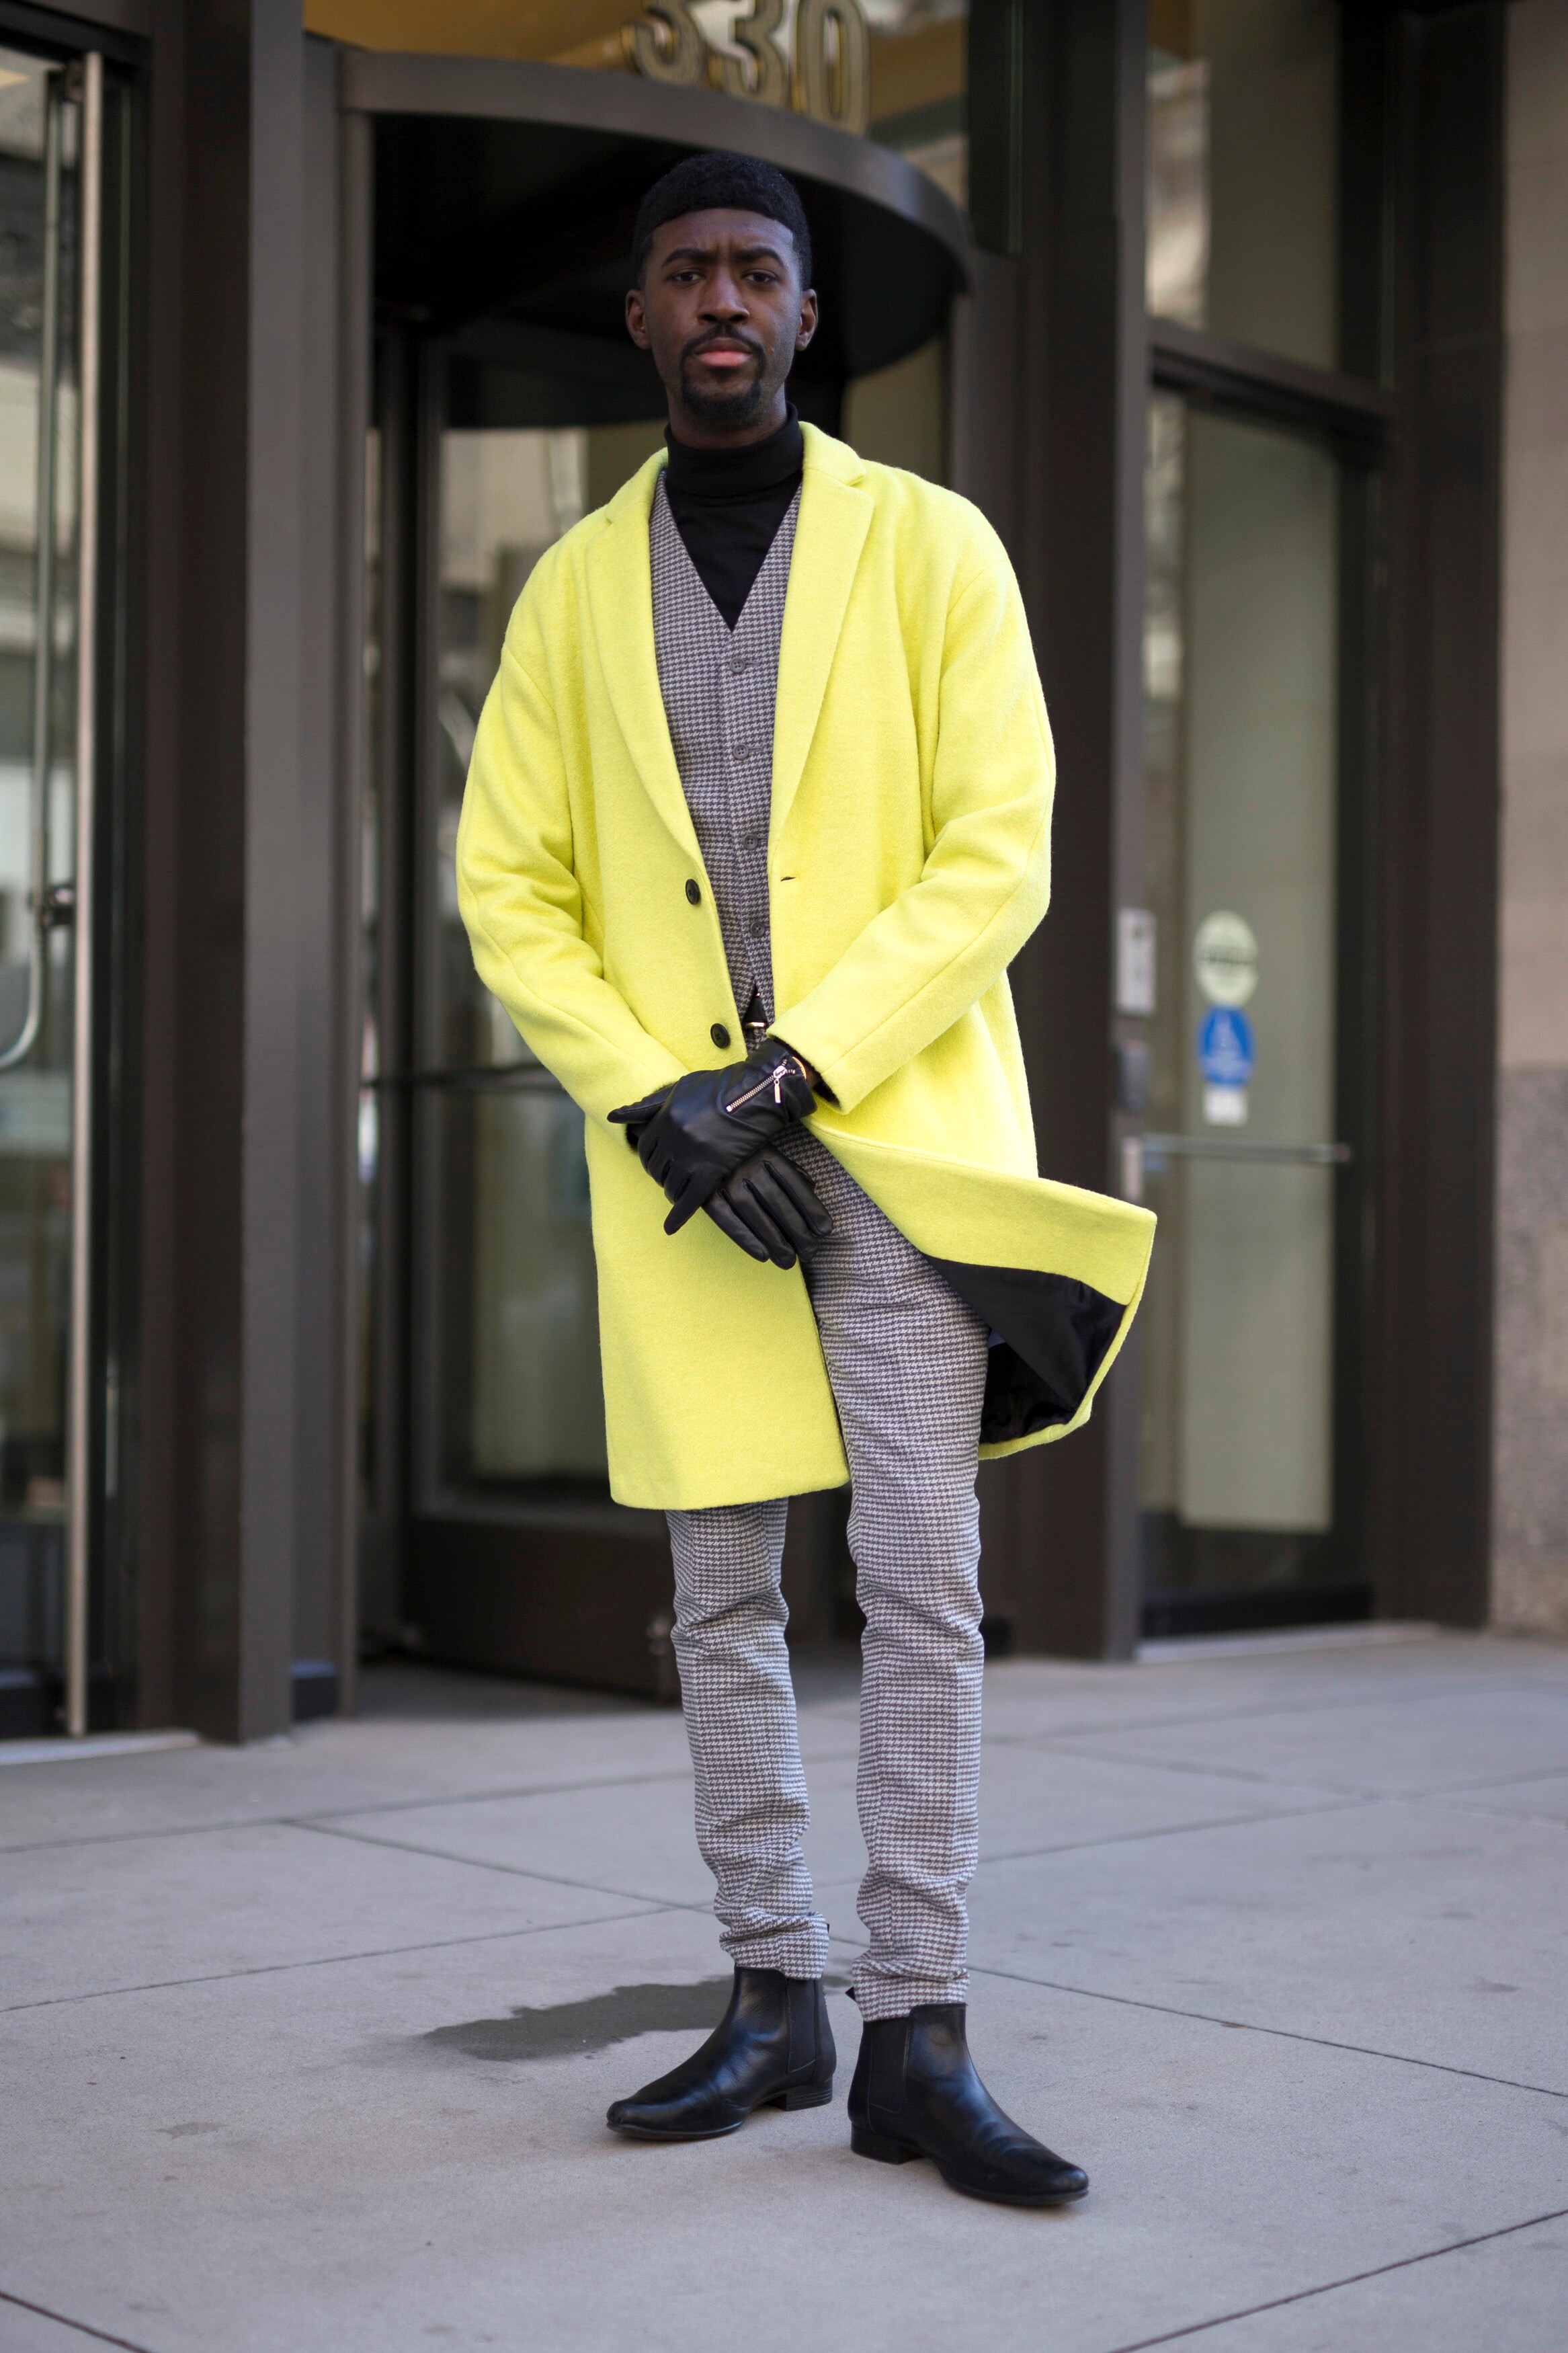 A streetstyler wearing a neon overcoat, a plain black roll neck, check suit and Chelsea boots